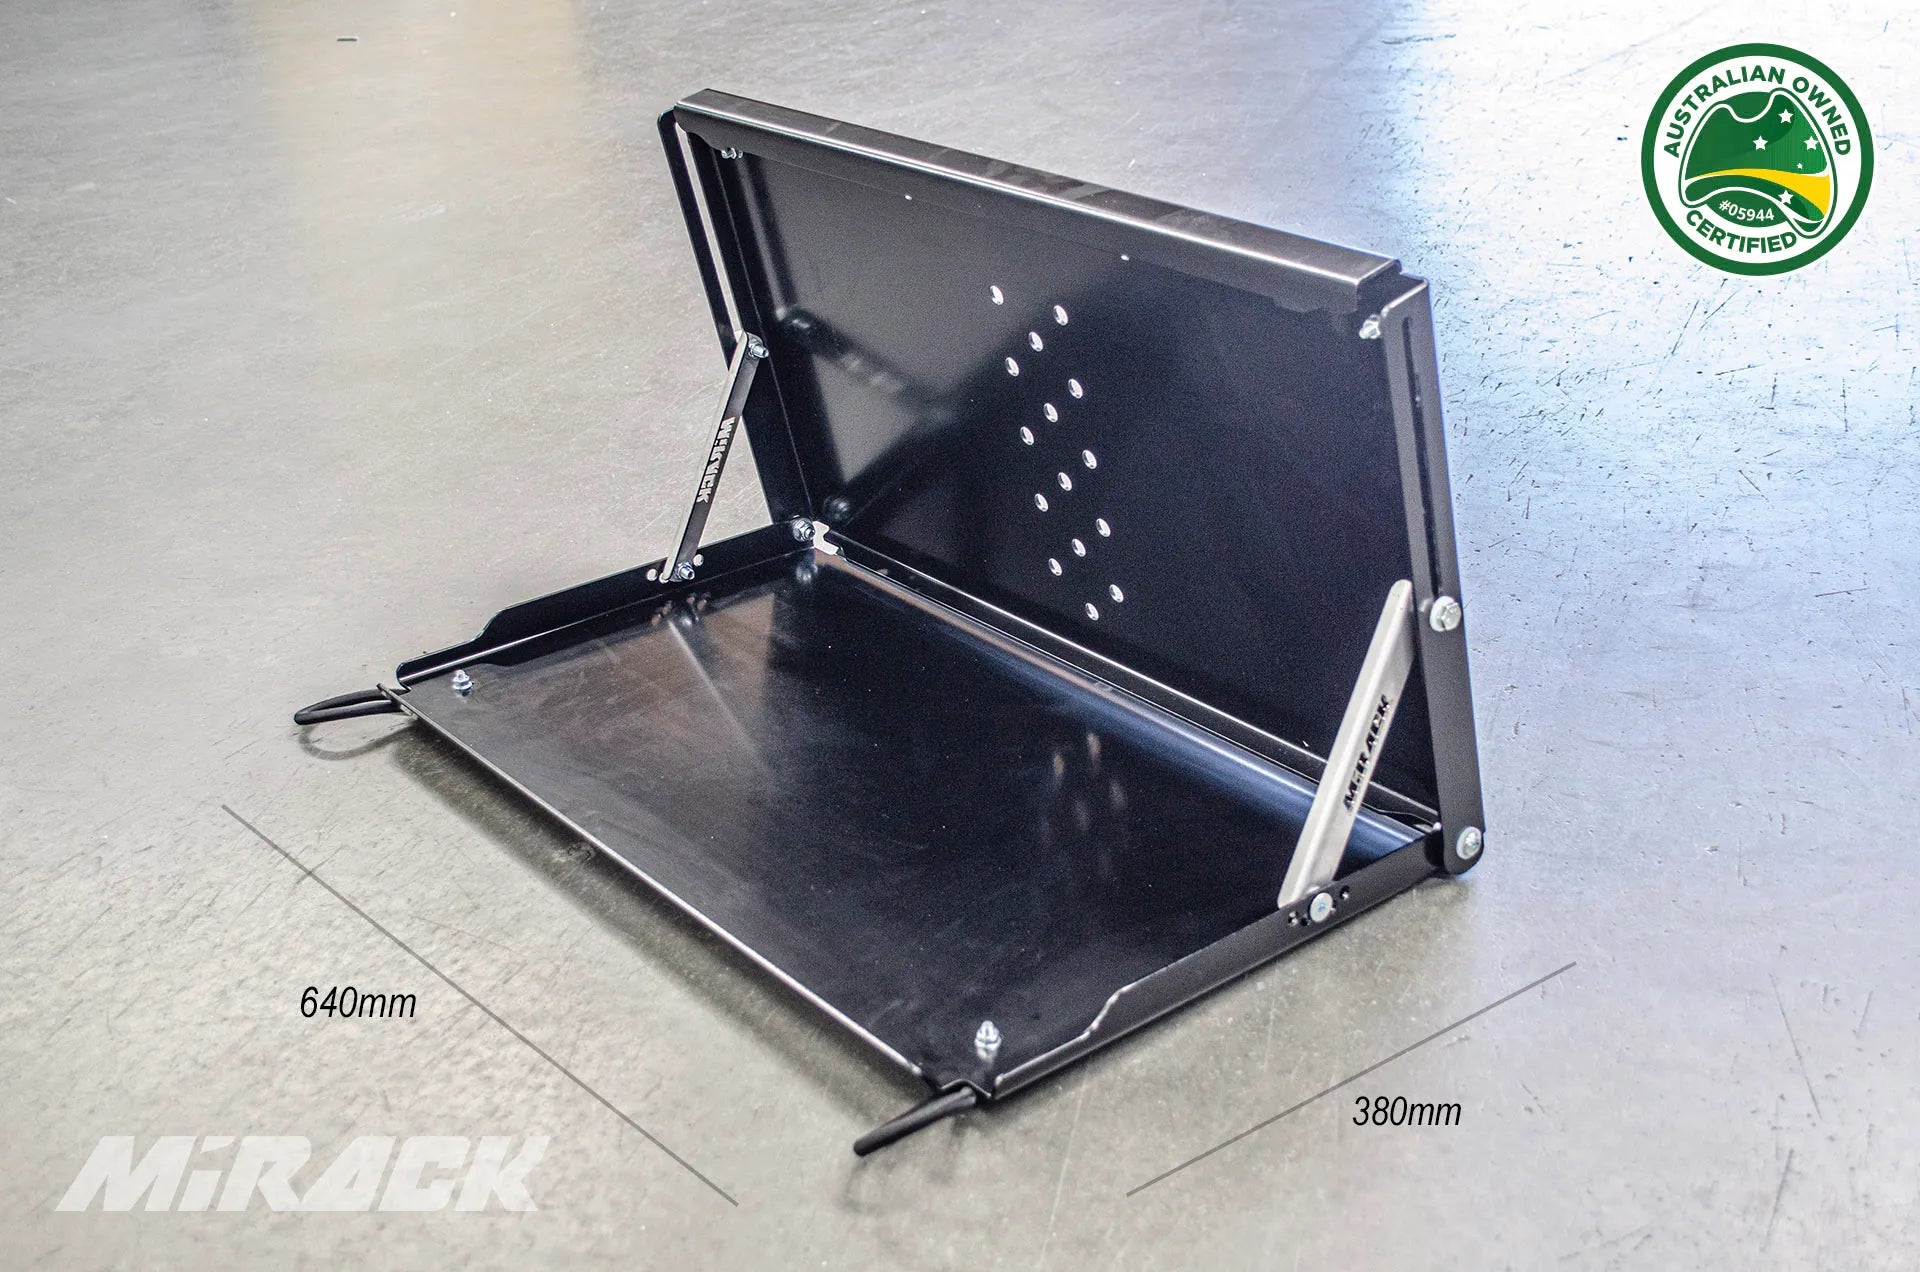 Mirack's folding table attachment transforms your spare wheel carrier into a convenient outdoor table.